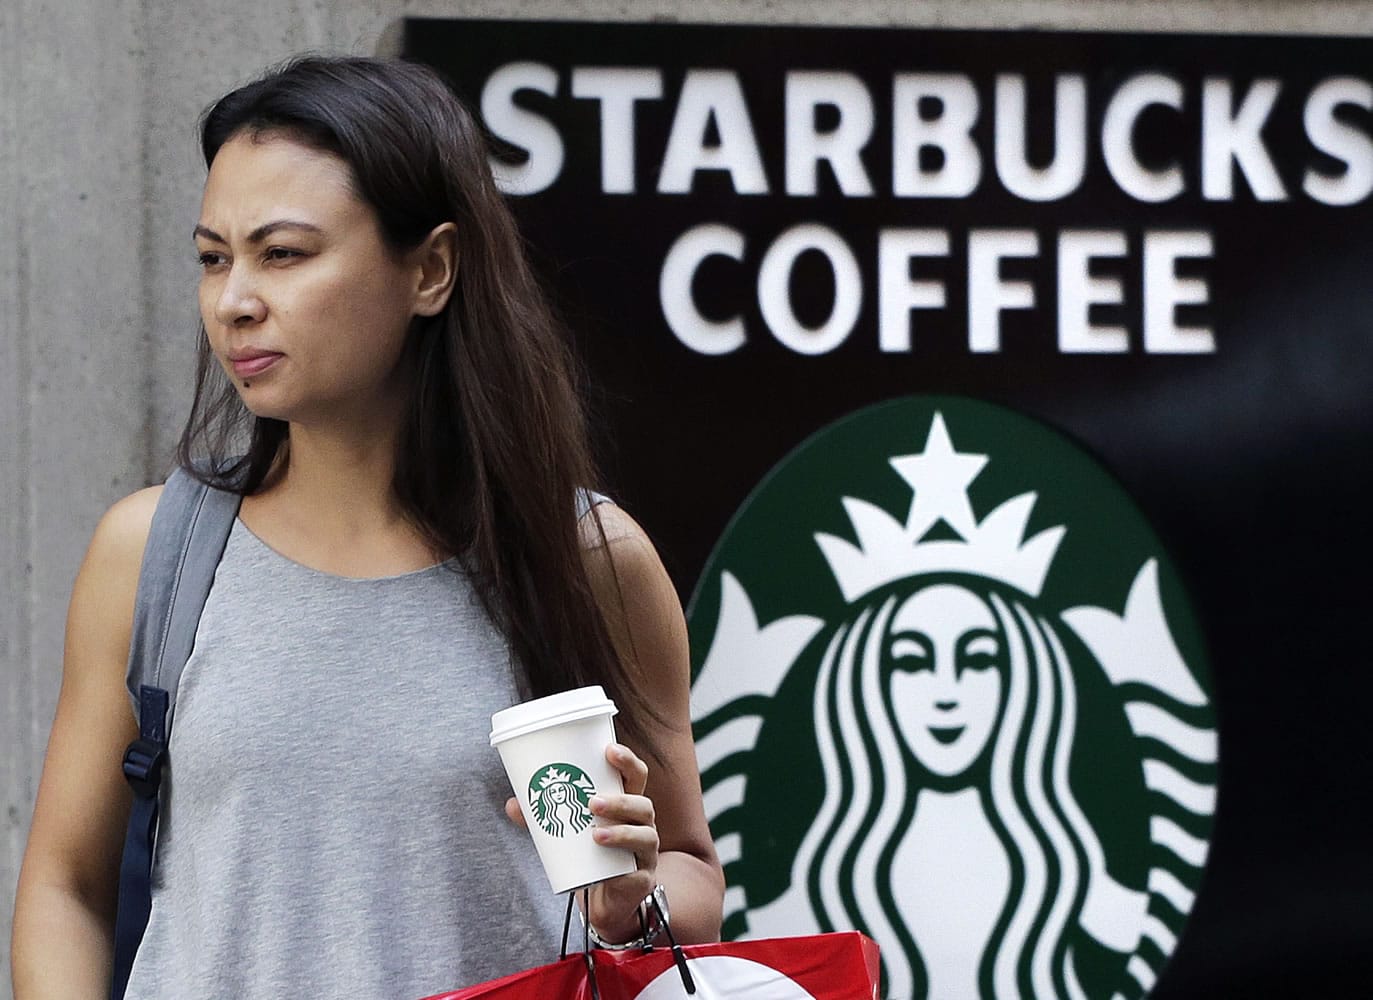 In this July 16, 2015, photo, a woman walks out of a Starbucks with a beverage in hand, in New York. Starbucks reports quarterly earnings on Thursday, Oct. 29, 2015.